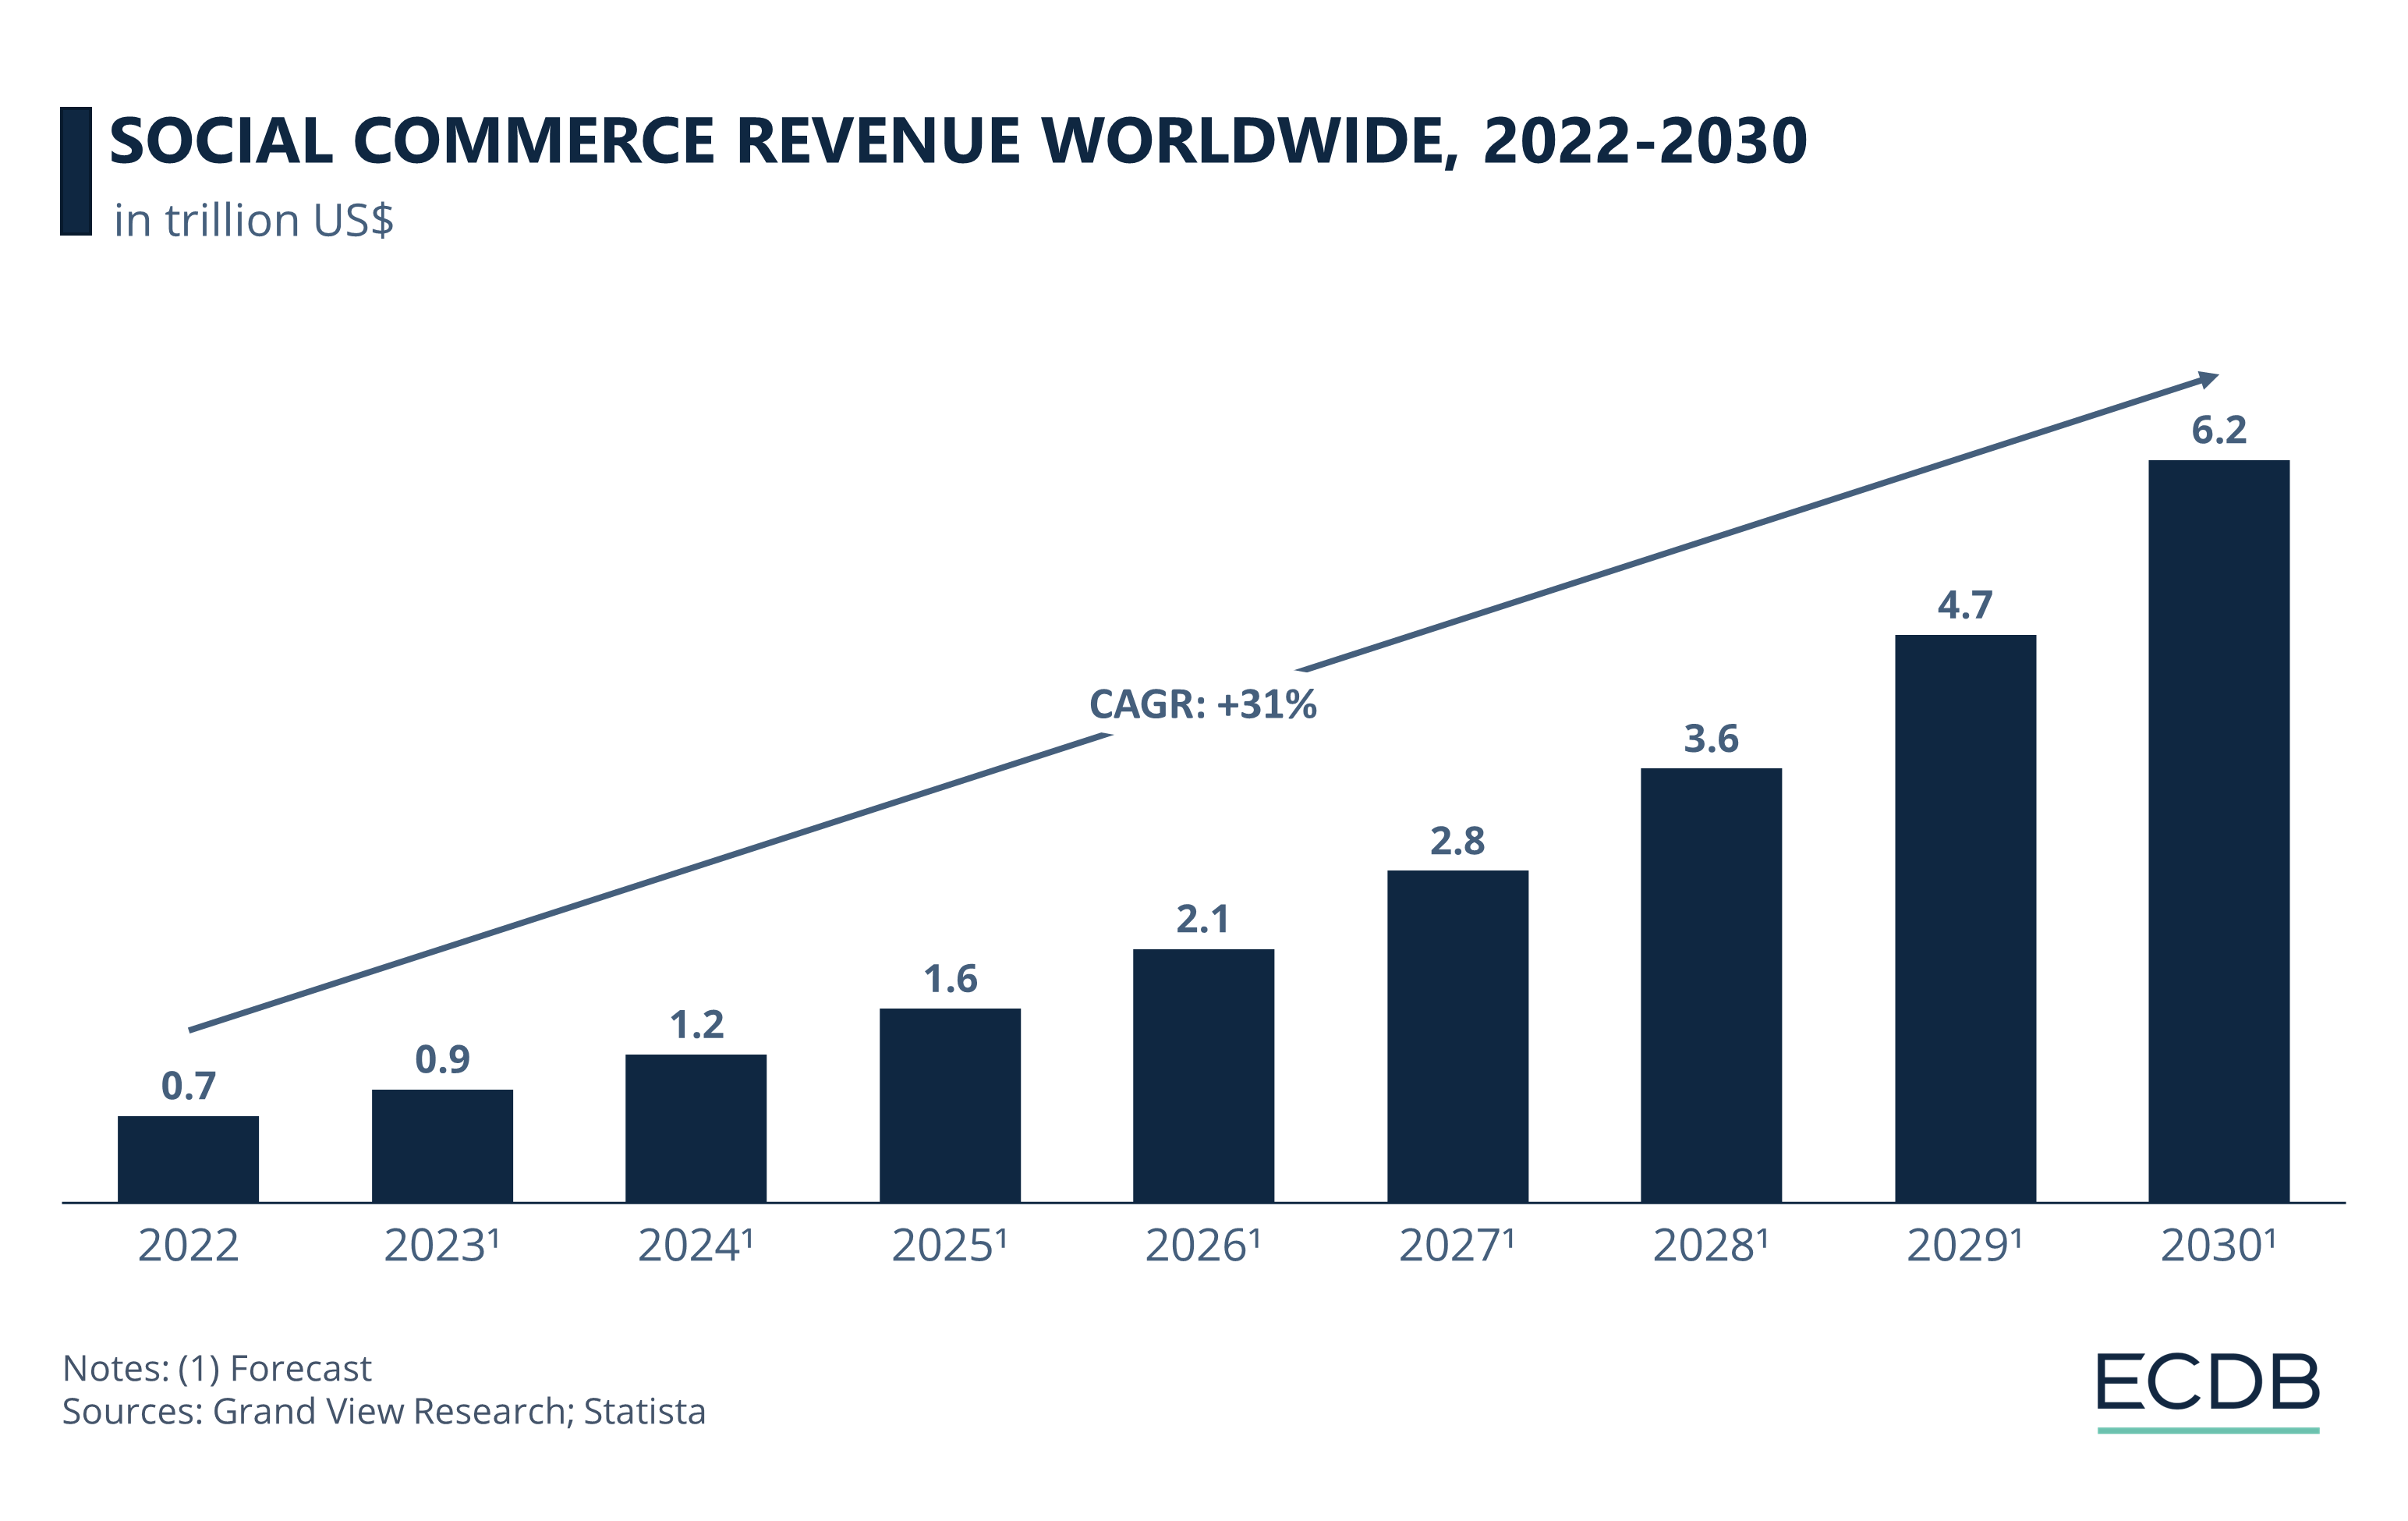 Social Commerce Revenue Worldwide, from 2022 to 2030